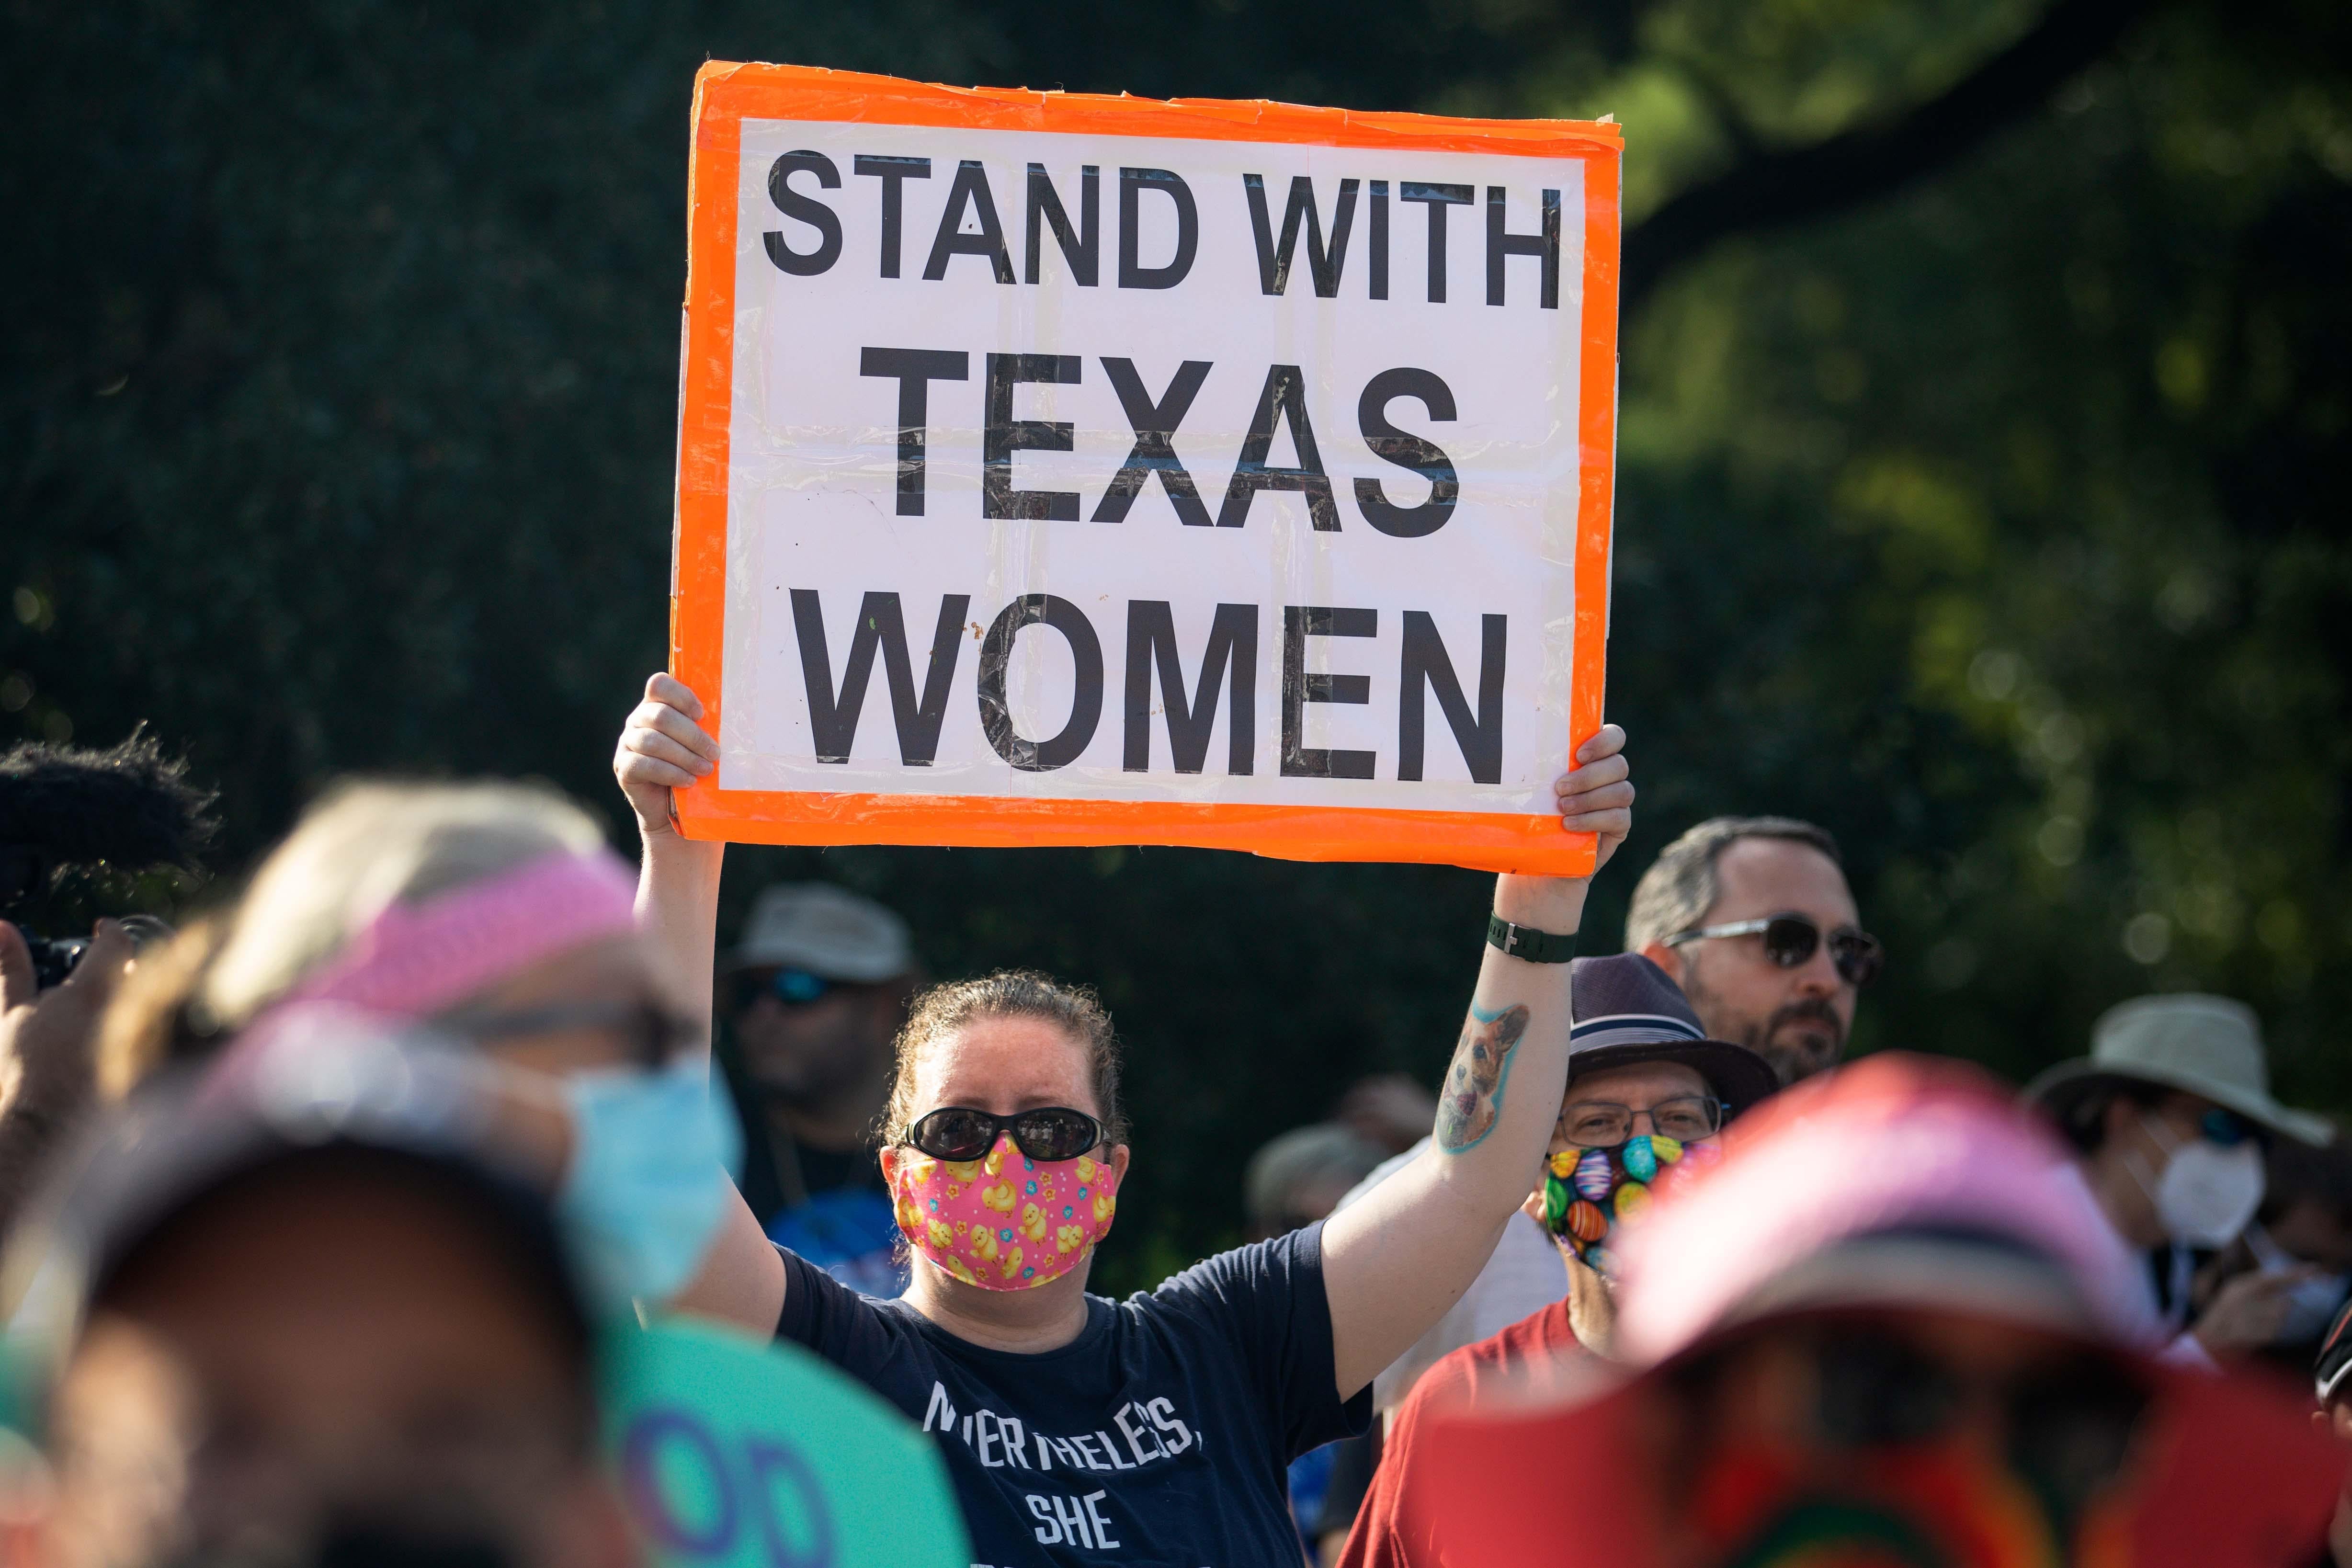 Demonstrators rally against anti-abortion and voter suppression laws at the Texas State Capitol on October 2, 2021 in Austin, Texas. 